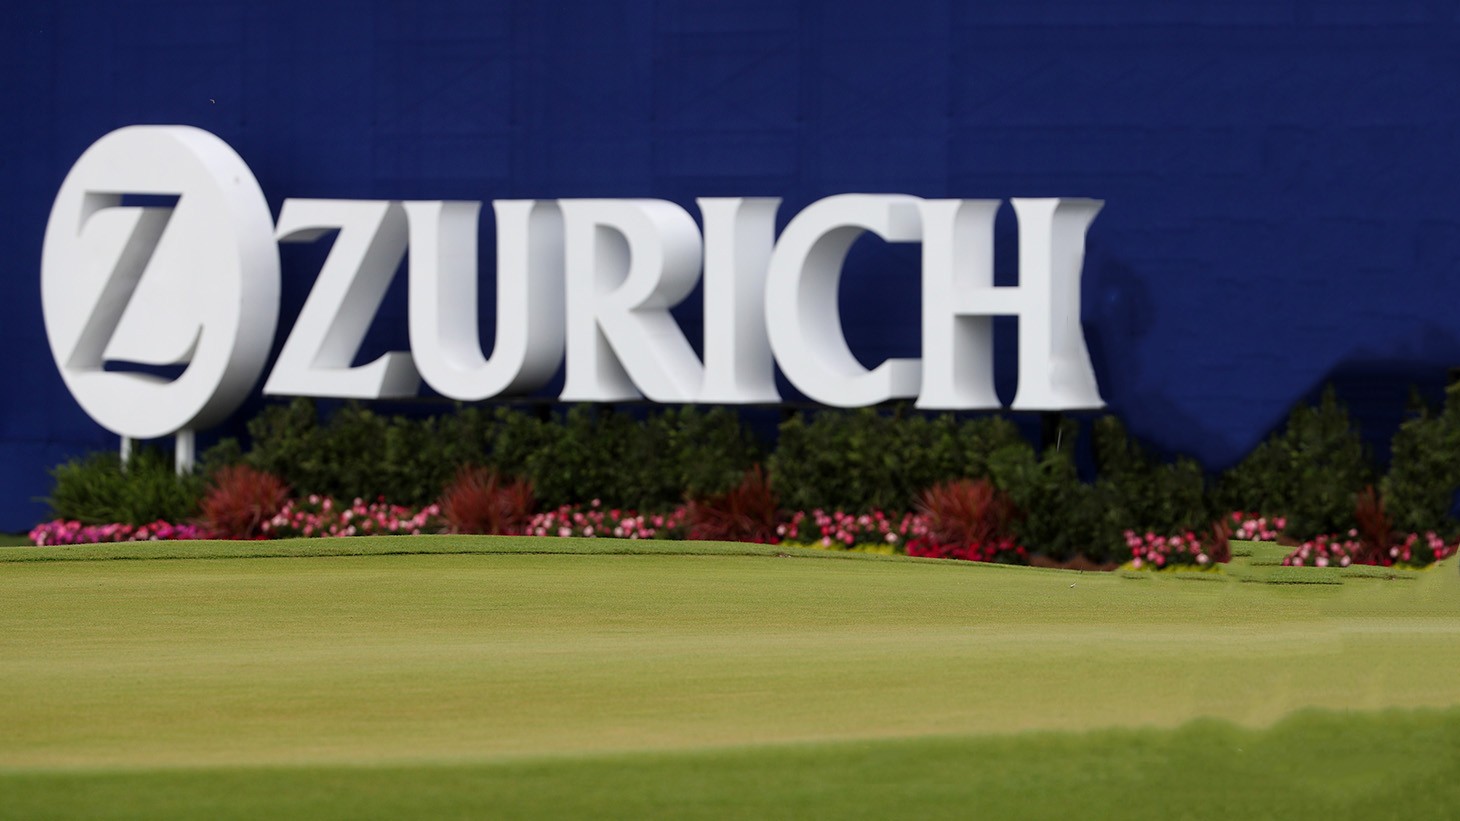 Zurich Classic of New Orleans